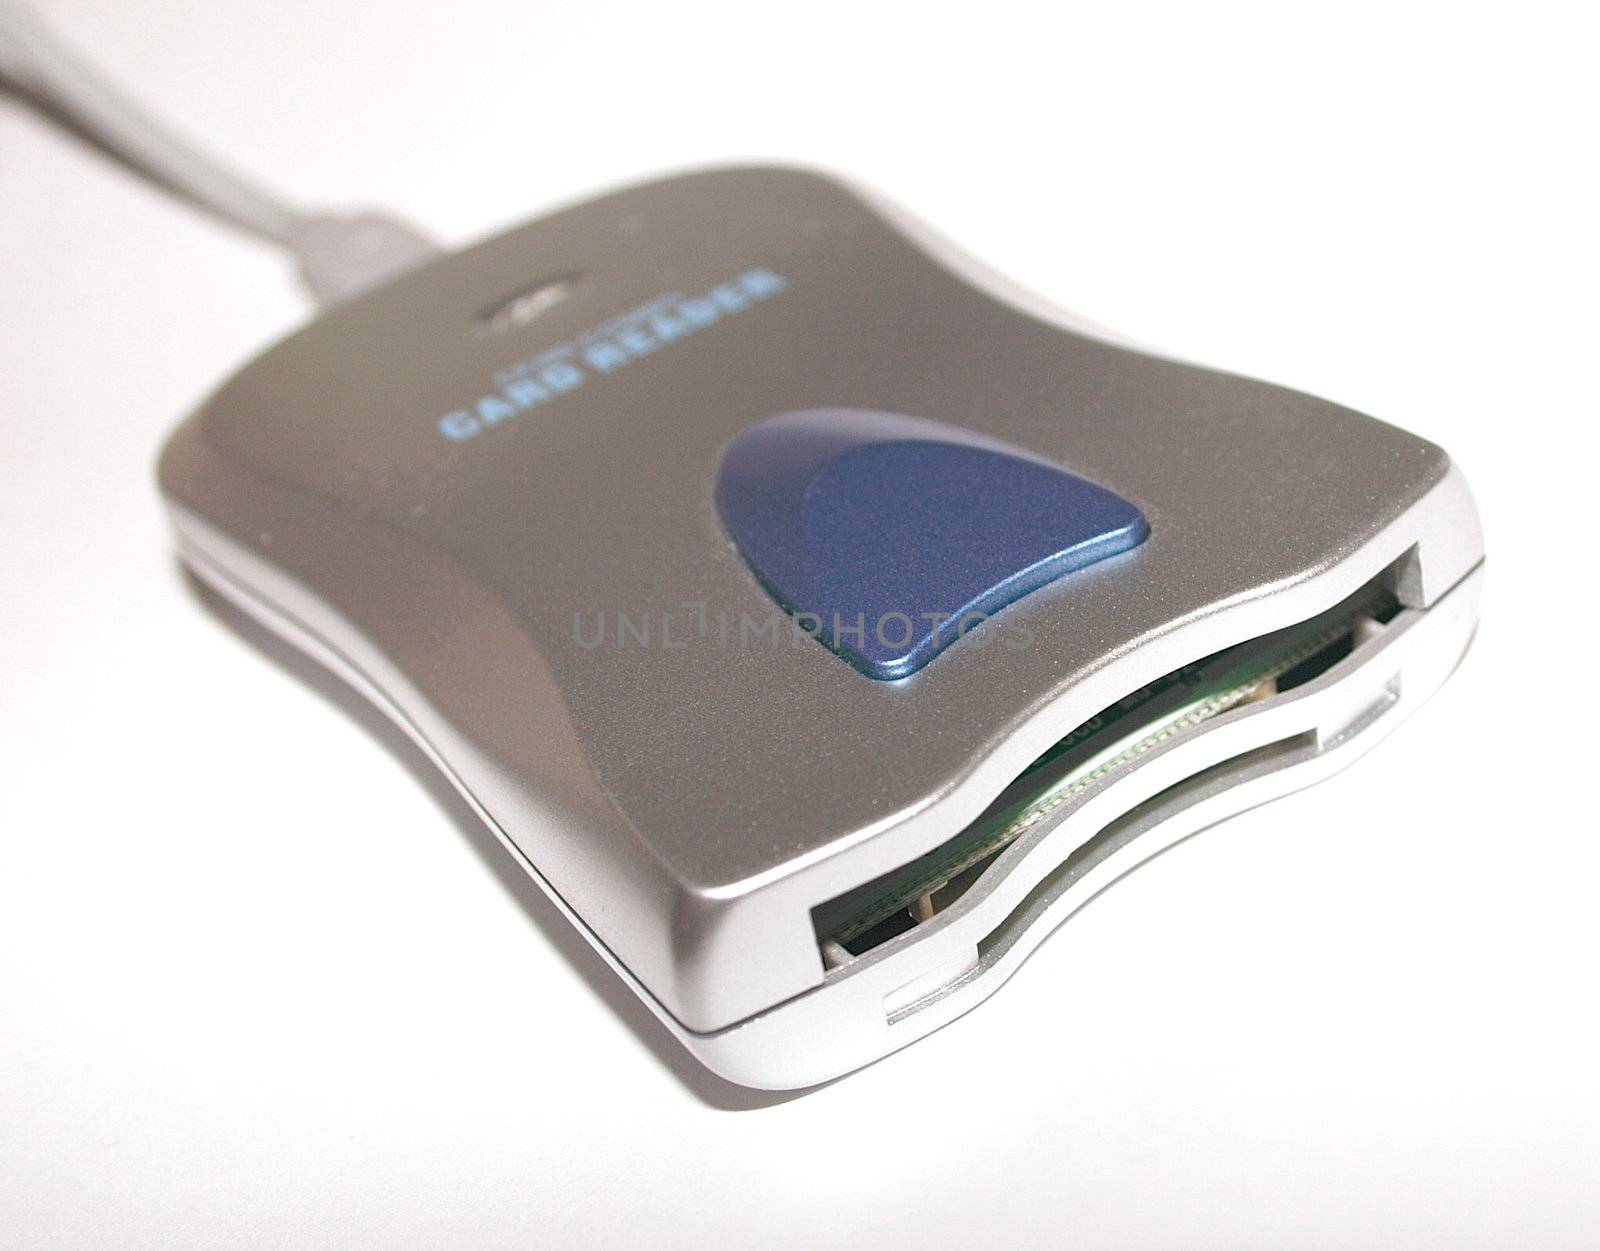 dual format card reader for compact flash and secure digital